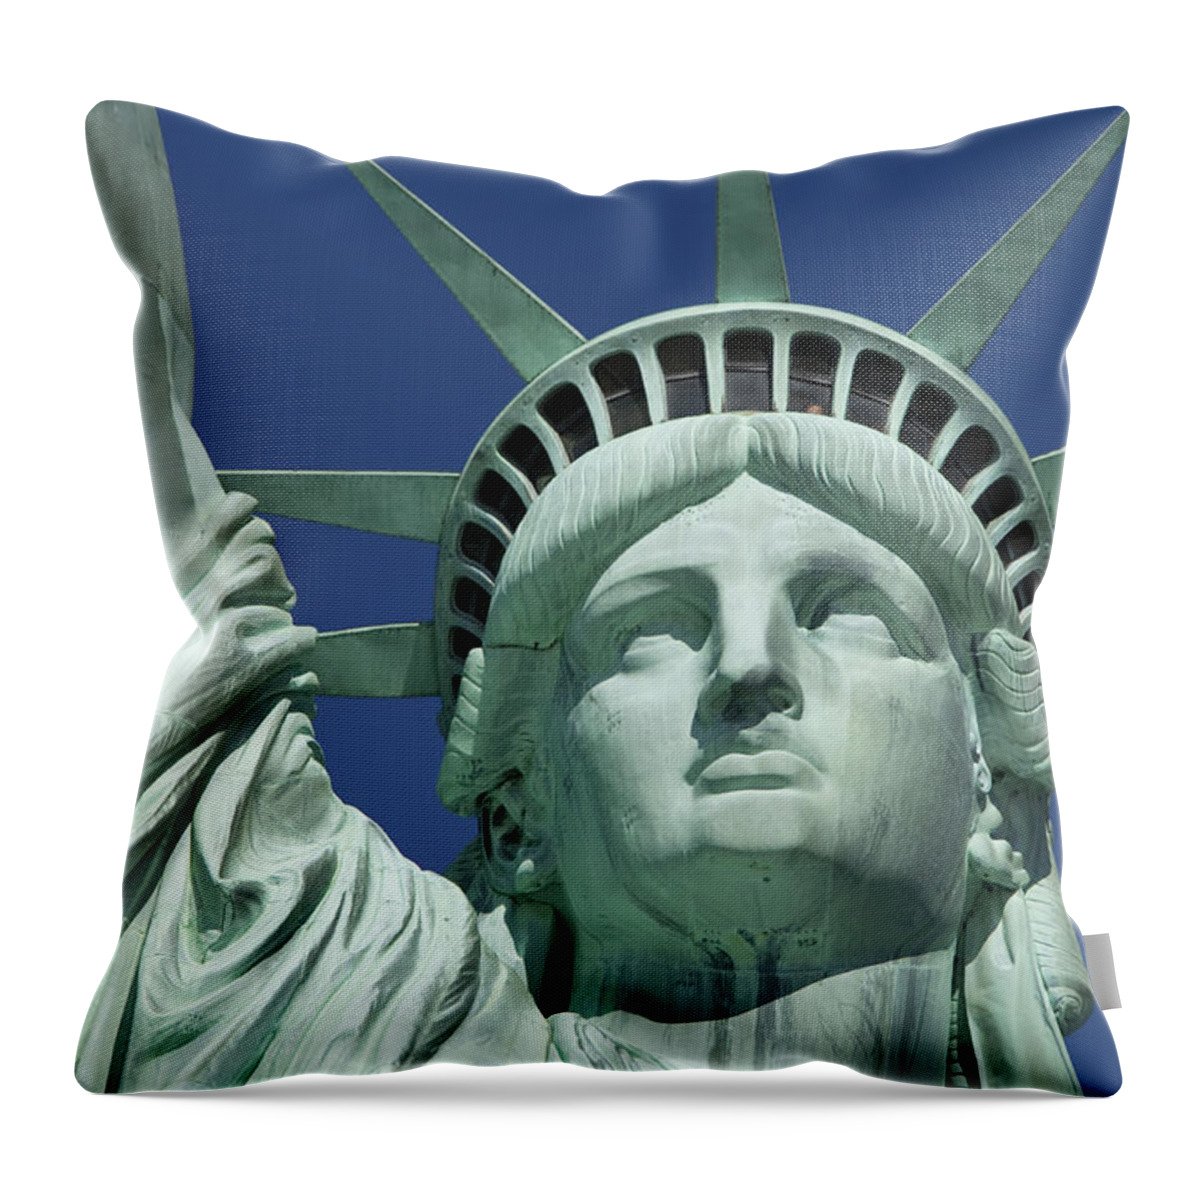 New York Throw Pillow featuring the photograph Liberty by Brian Jannsen